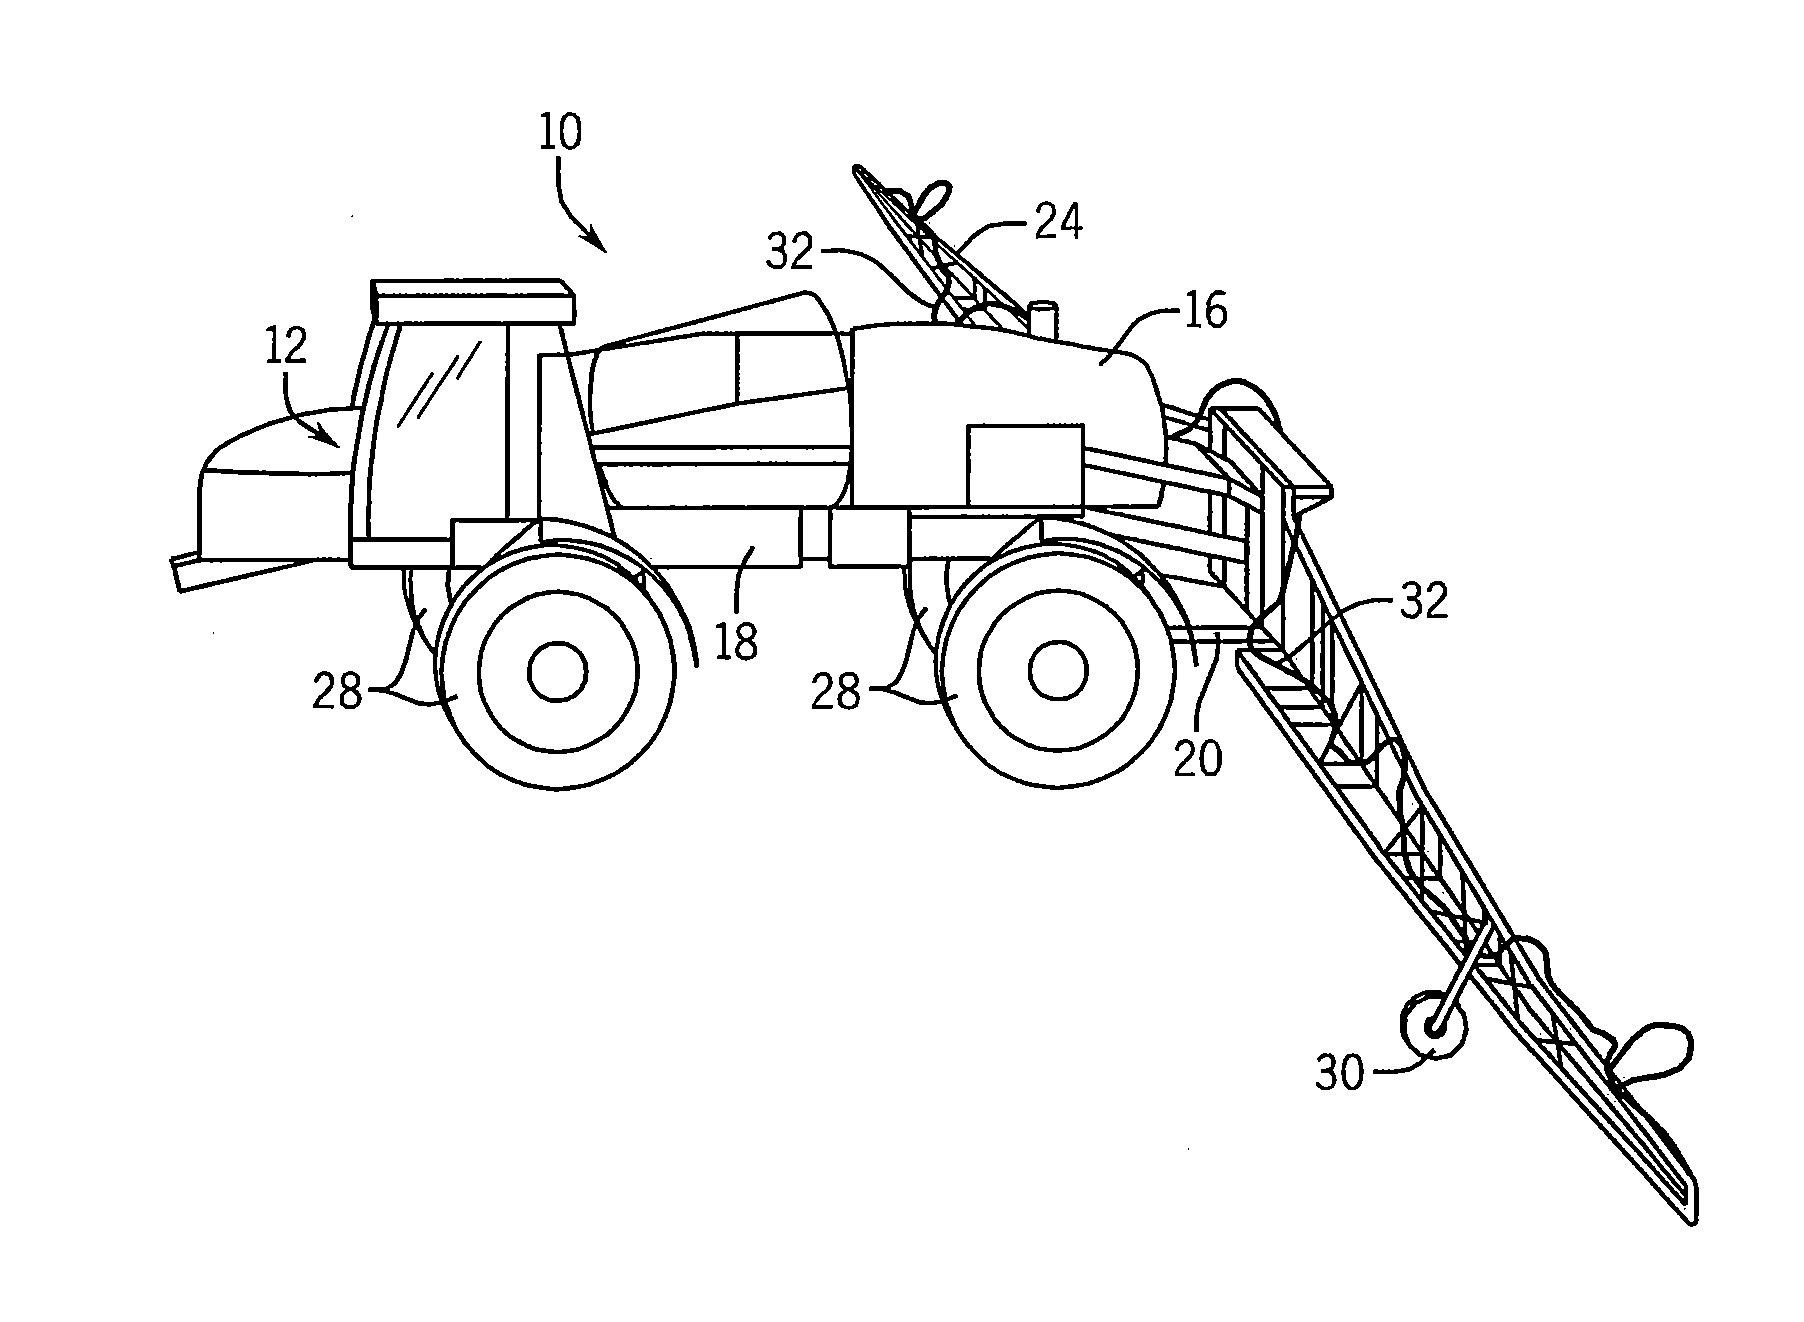 Method And Apparatus For Detecting A Plugged Nozzle Of A Sprayer